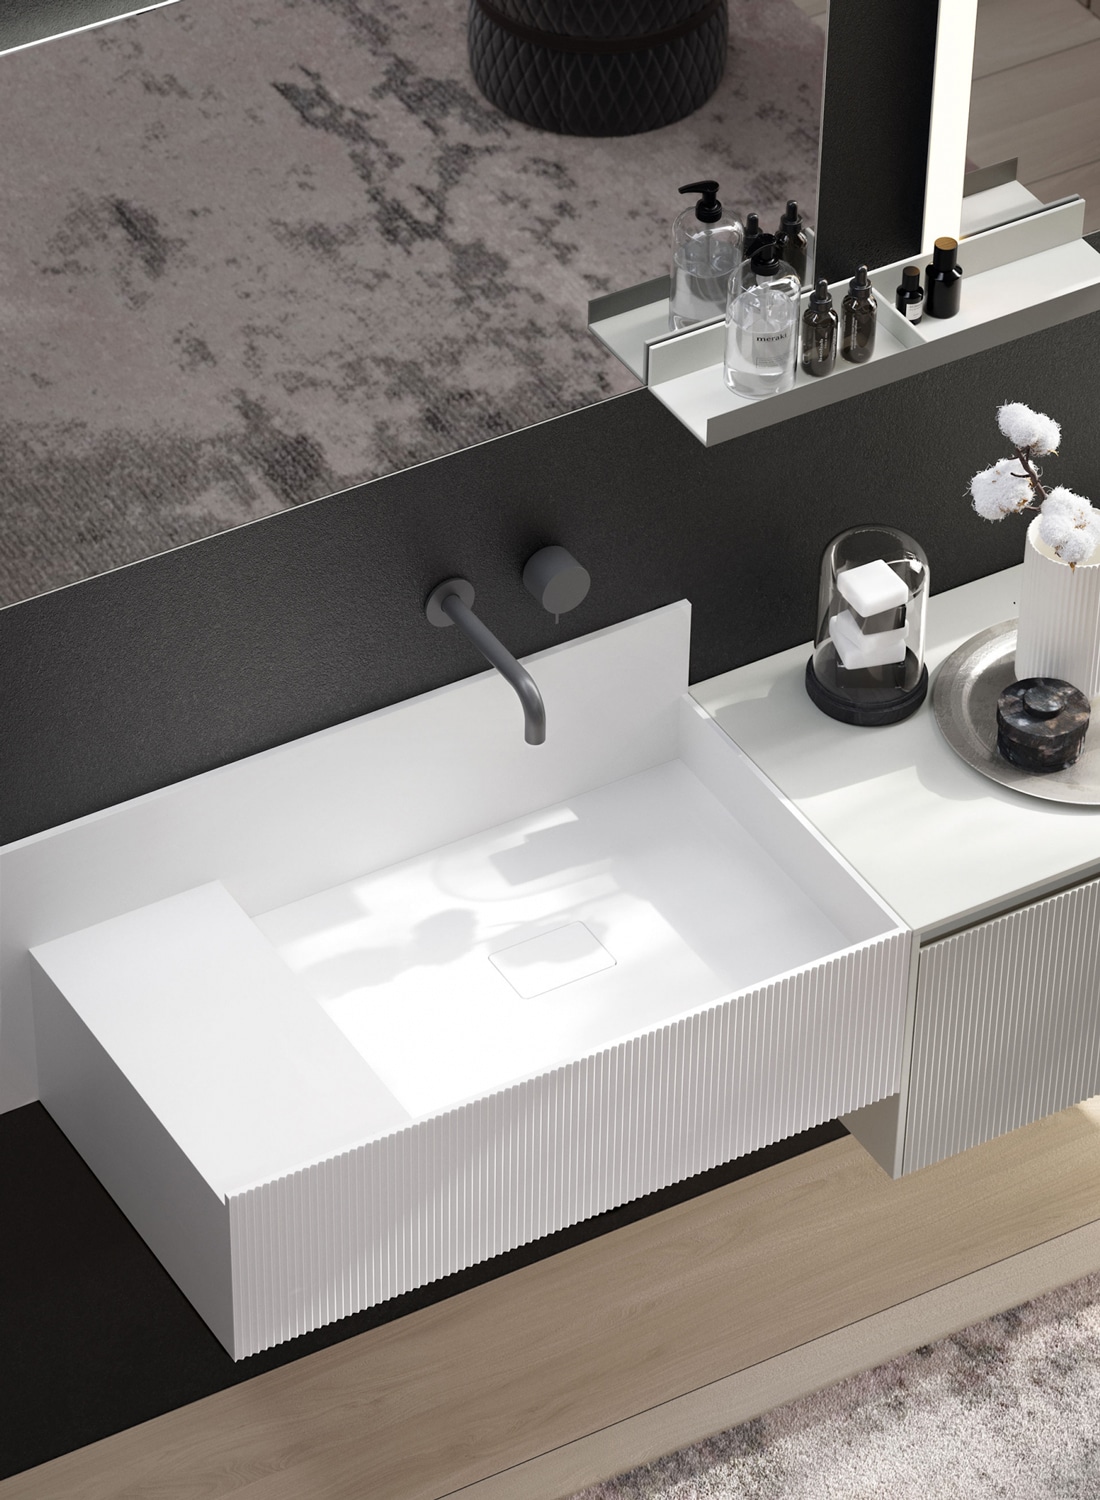 Teknorit washbasin with protective lip and the plissé front that is characteristic of the D’Art bathroom line. 